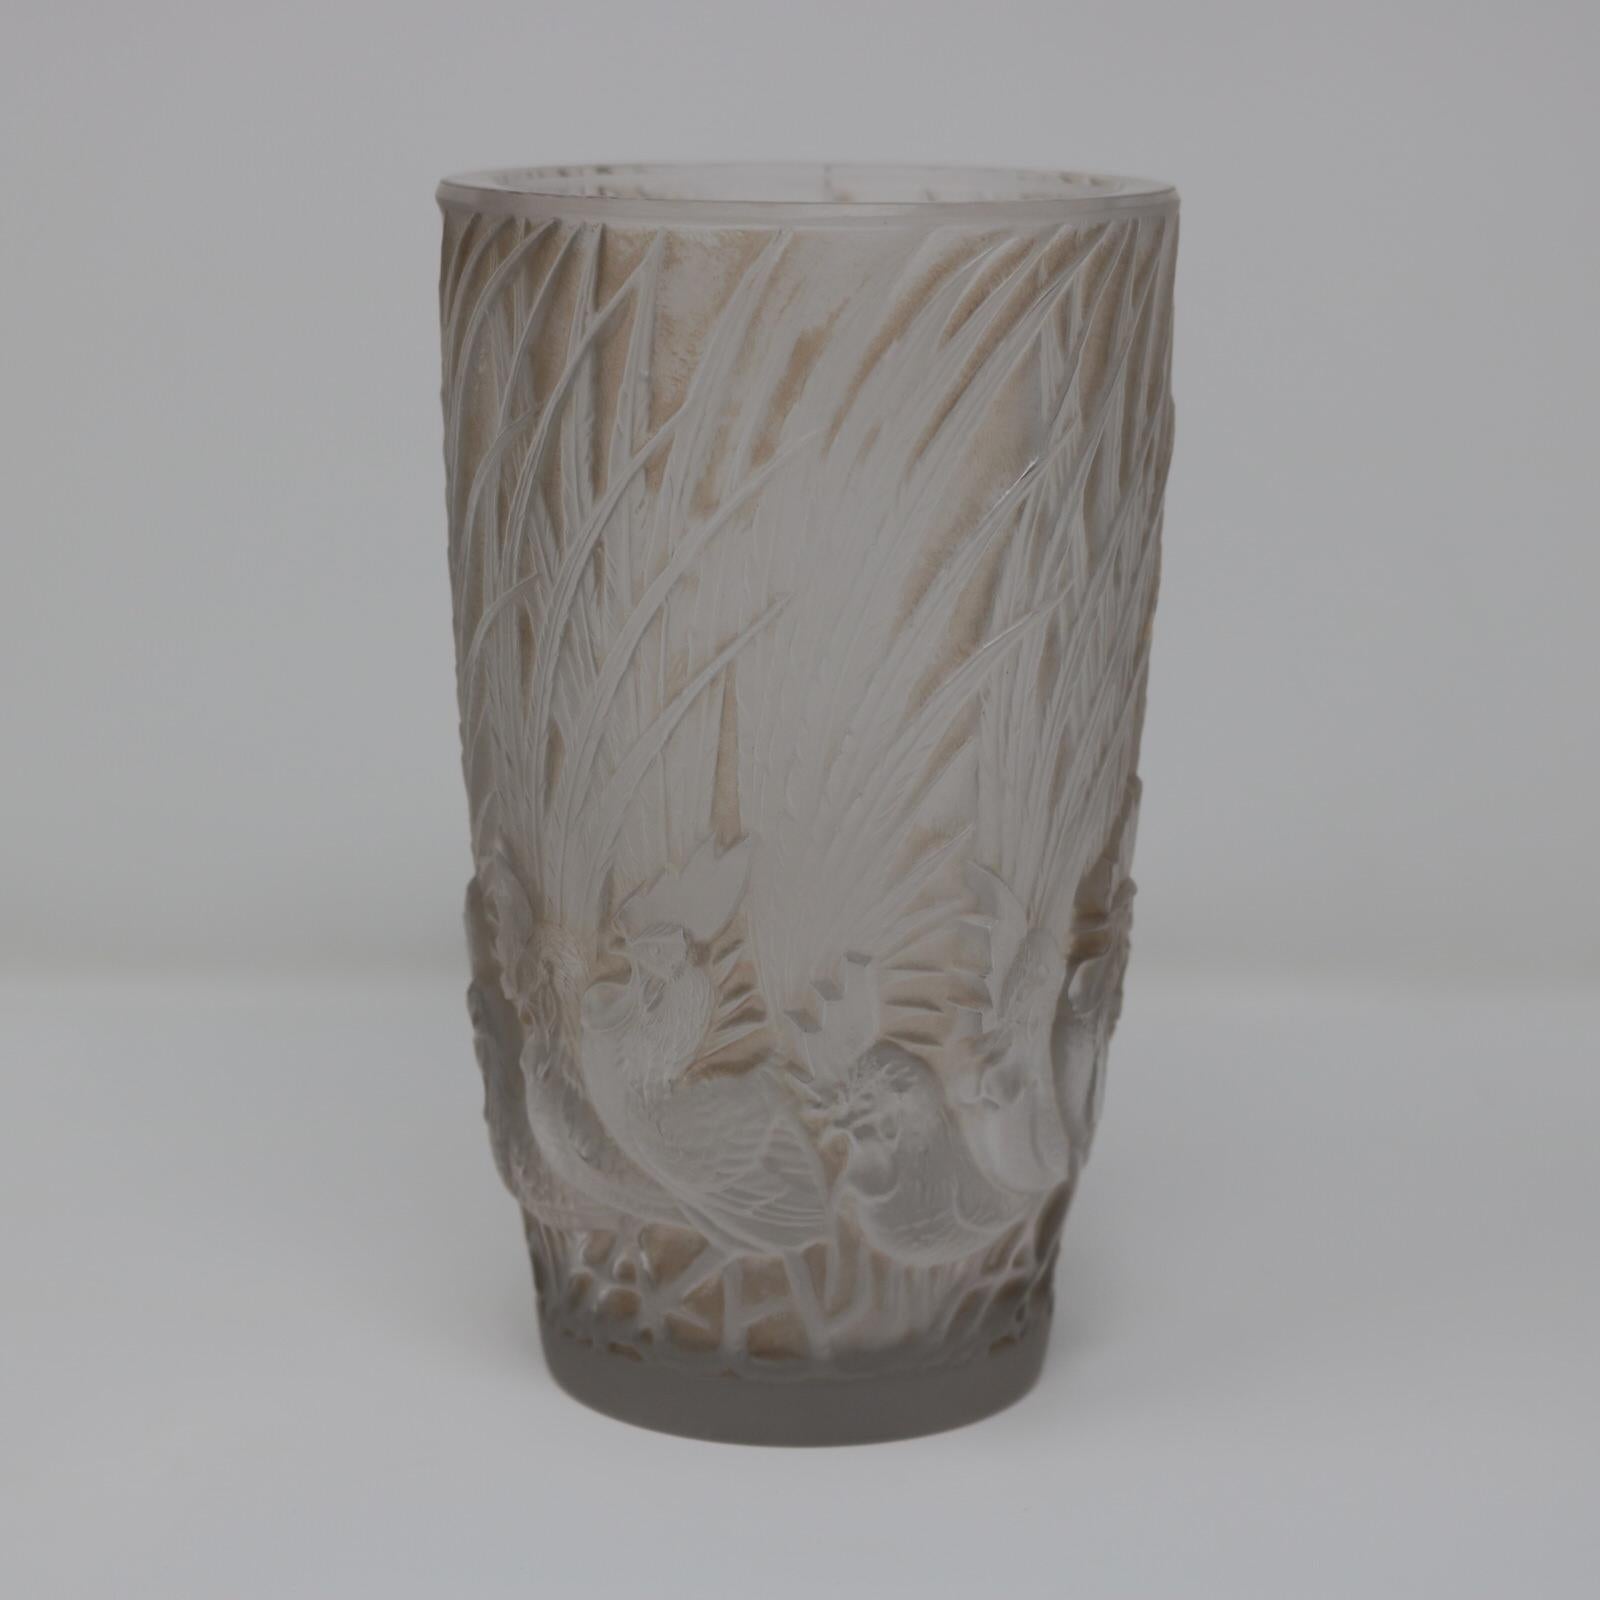 Rene Lalique clear and frosted glass 'Coqs Et Plumes' Vase. Sepia staining to the details. This pattern features cockerels/roosters around the base with their tail feathers rising up the sides of the vase. Wheel cut maker's mark, 'R. LALIQUE'.